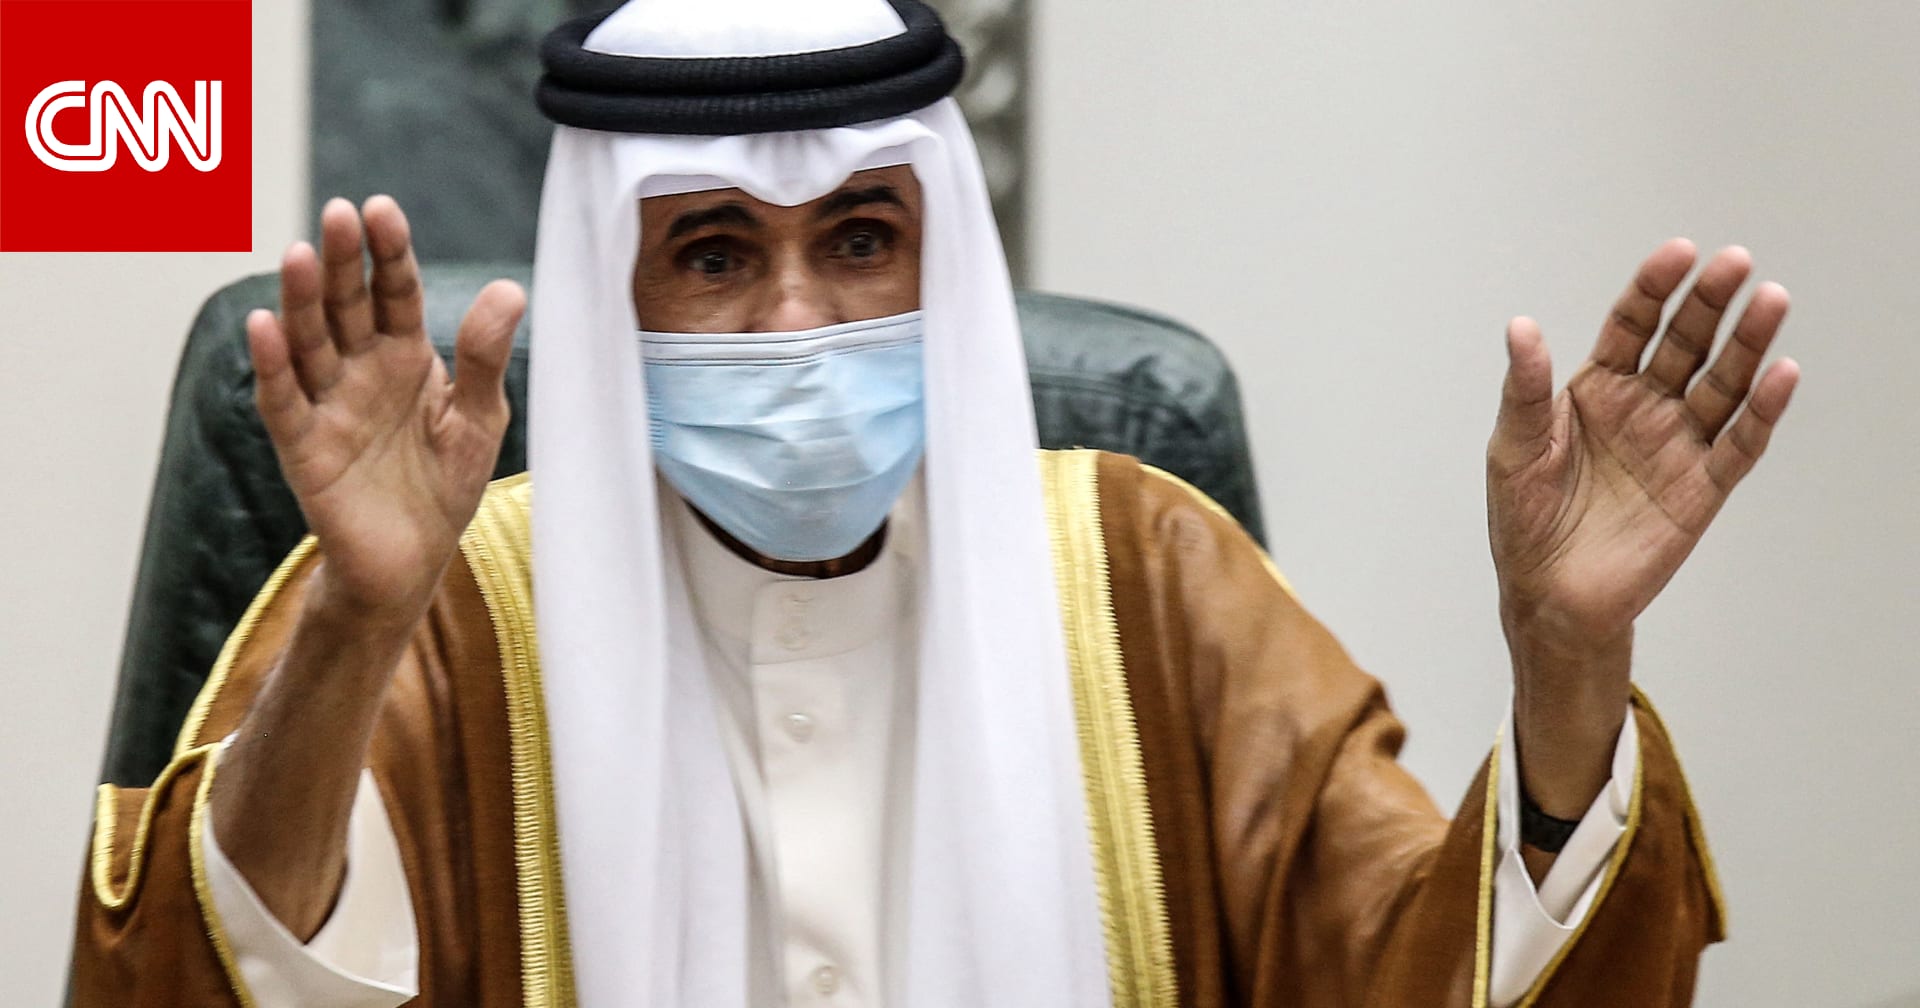 The Amiri Diwan confirms the stability of the health of the Emir of Kuwait… and the Public Prosecution threatens to prosecute those spreading rumors about “the arrangement of the ruling house.”